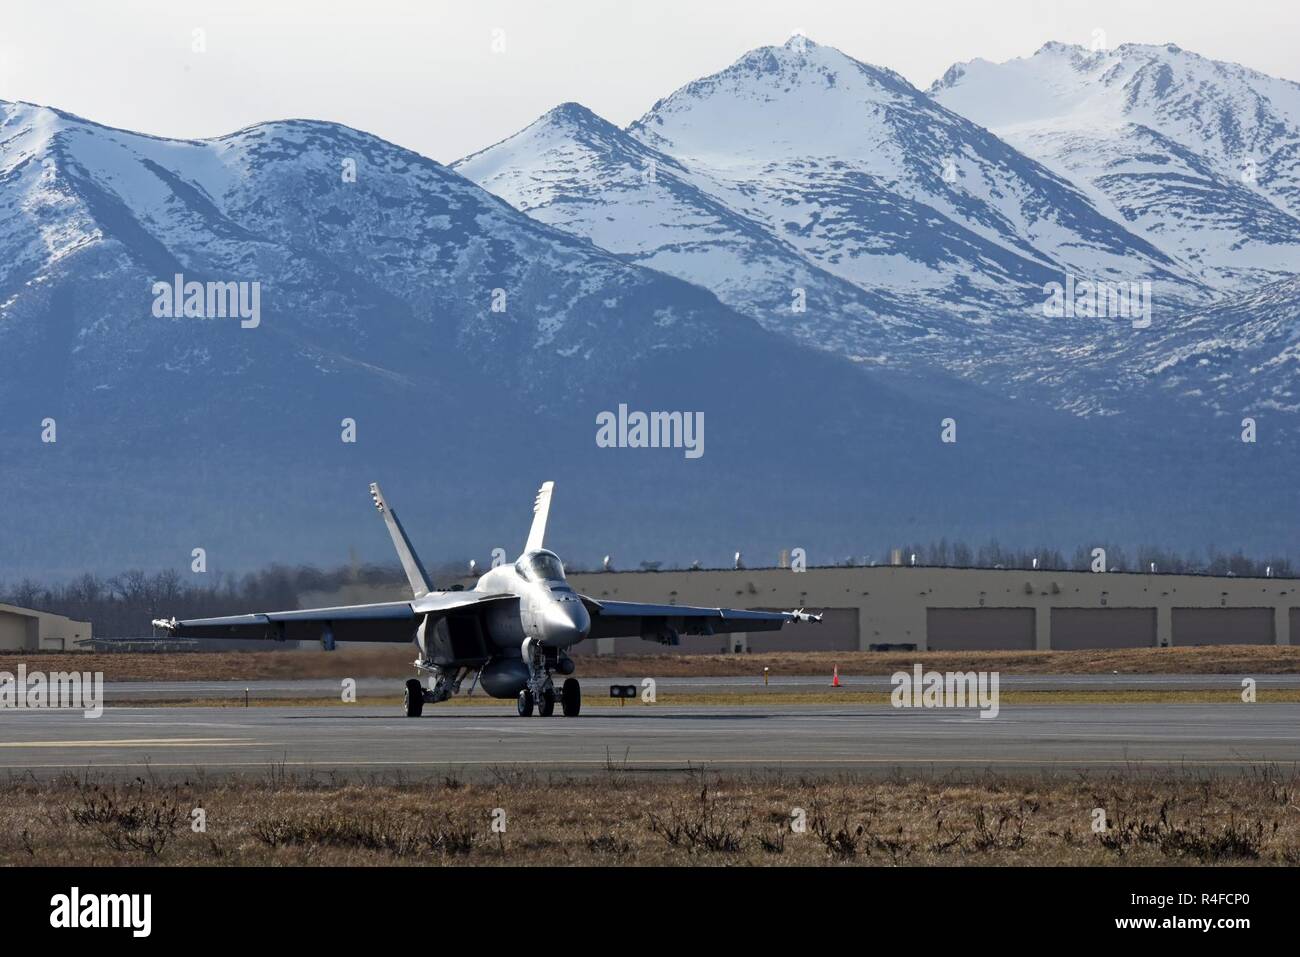 An F/A-18E Super Hornet attached to Strike Fighter Squadron 14 from Naval Air Station Lemoore, Calif., taxis down the ramp at Joint Base Elmendorf-Richardson, Alaska, prior to take-off May 3, 2017, in support of Exercise Northern Edge 2017. Northern Edge is Alaska’s largest and premier joint training exercise designed to practice operations, techniques and procedures, as well as enhance interoperability among the services. Thousands of participants from all the services—Airmen, Soldiers, Sailors, Marines and Coast Guard personnel from active duty, Reserve and National Guard units—are involved. Stock Photo